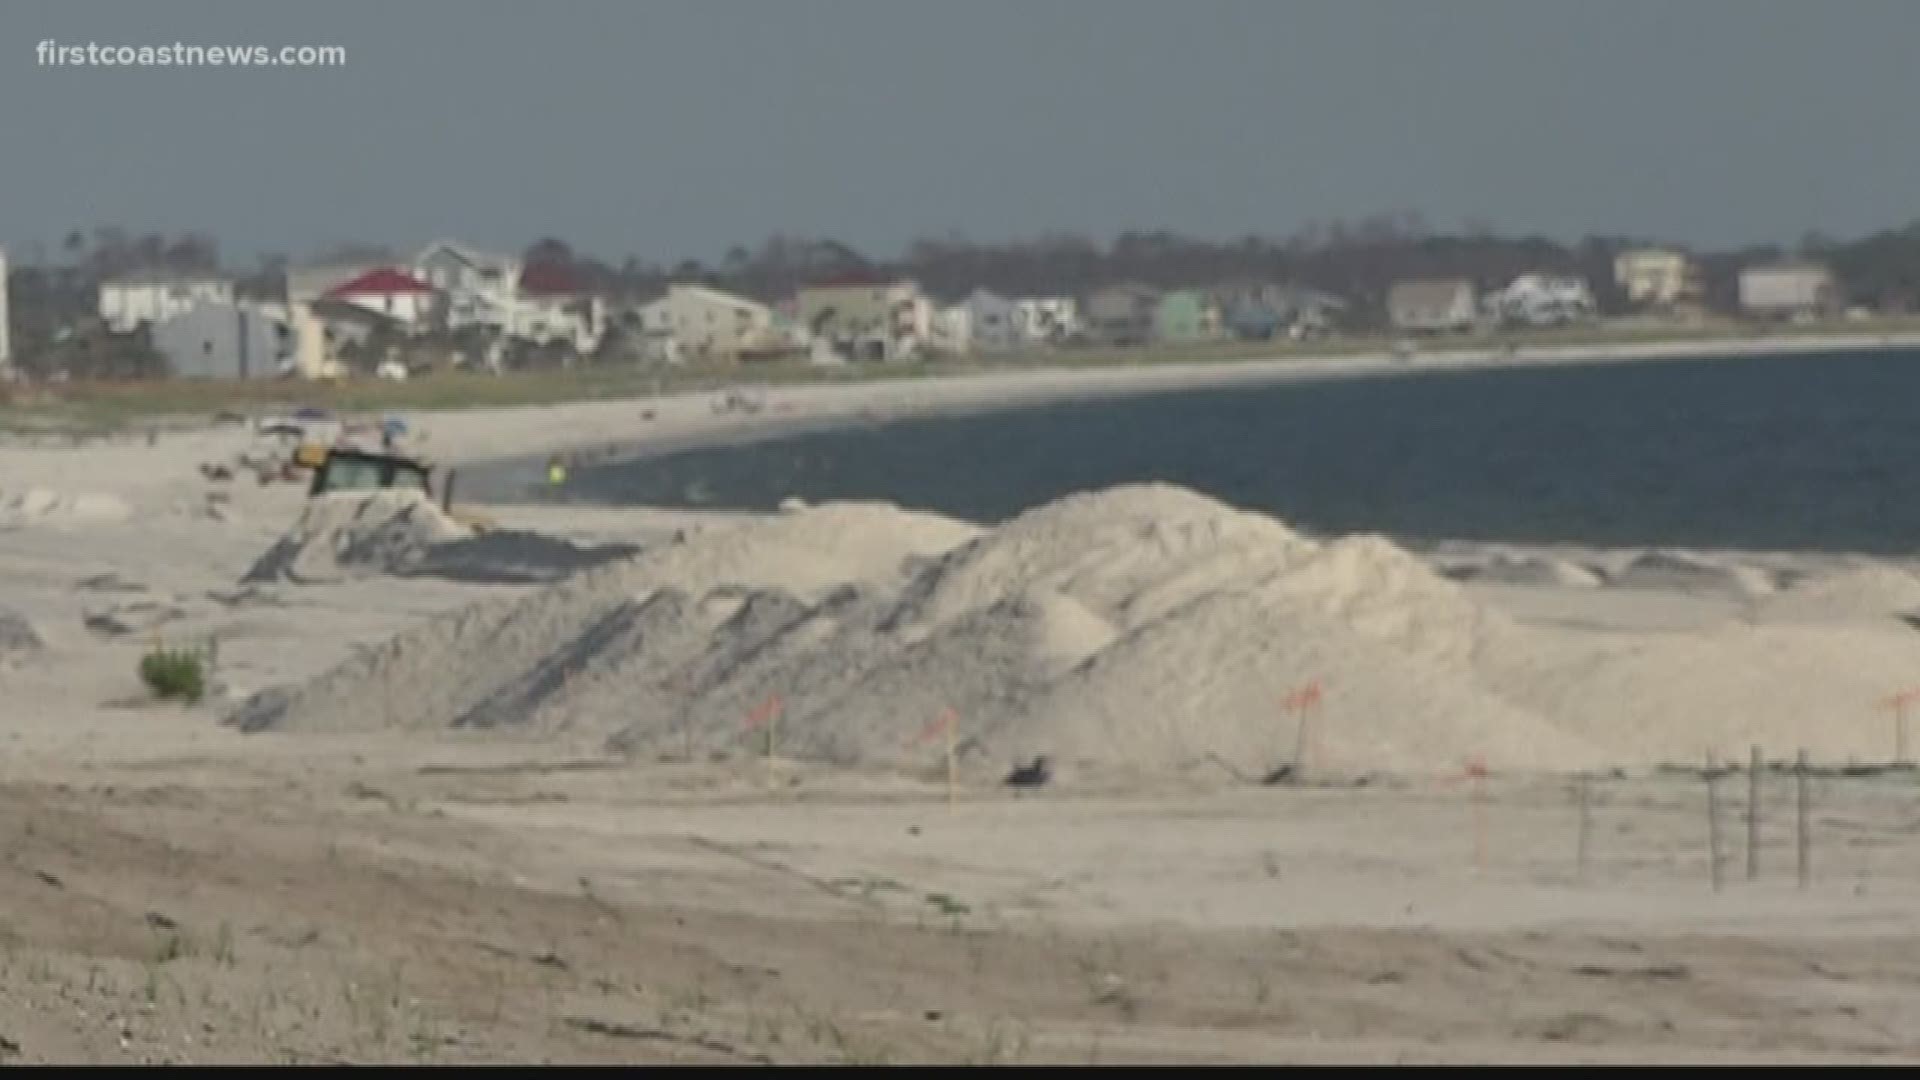 Major dune erosion was found in Mexico Beach, meaning dunes were removed and the beach had lowered from the highway that stretches right along shore.